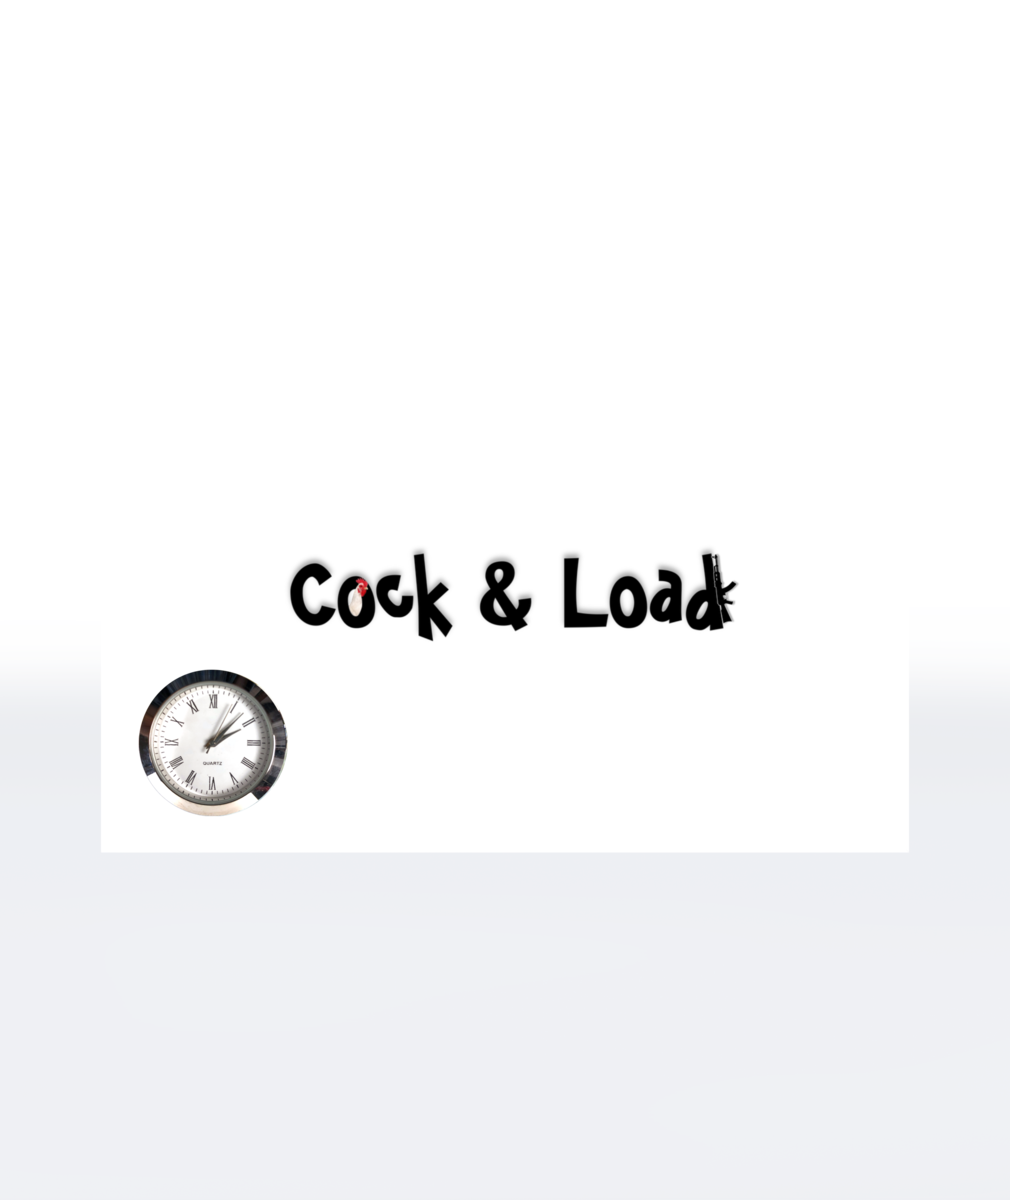 Cock n load Glass Plaque with Clock (5